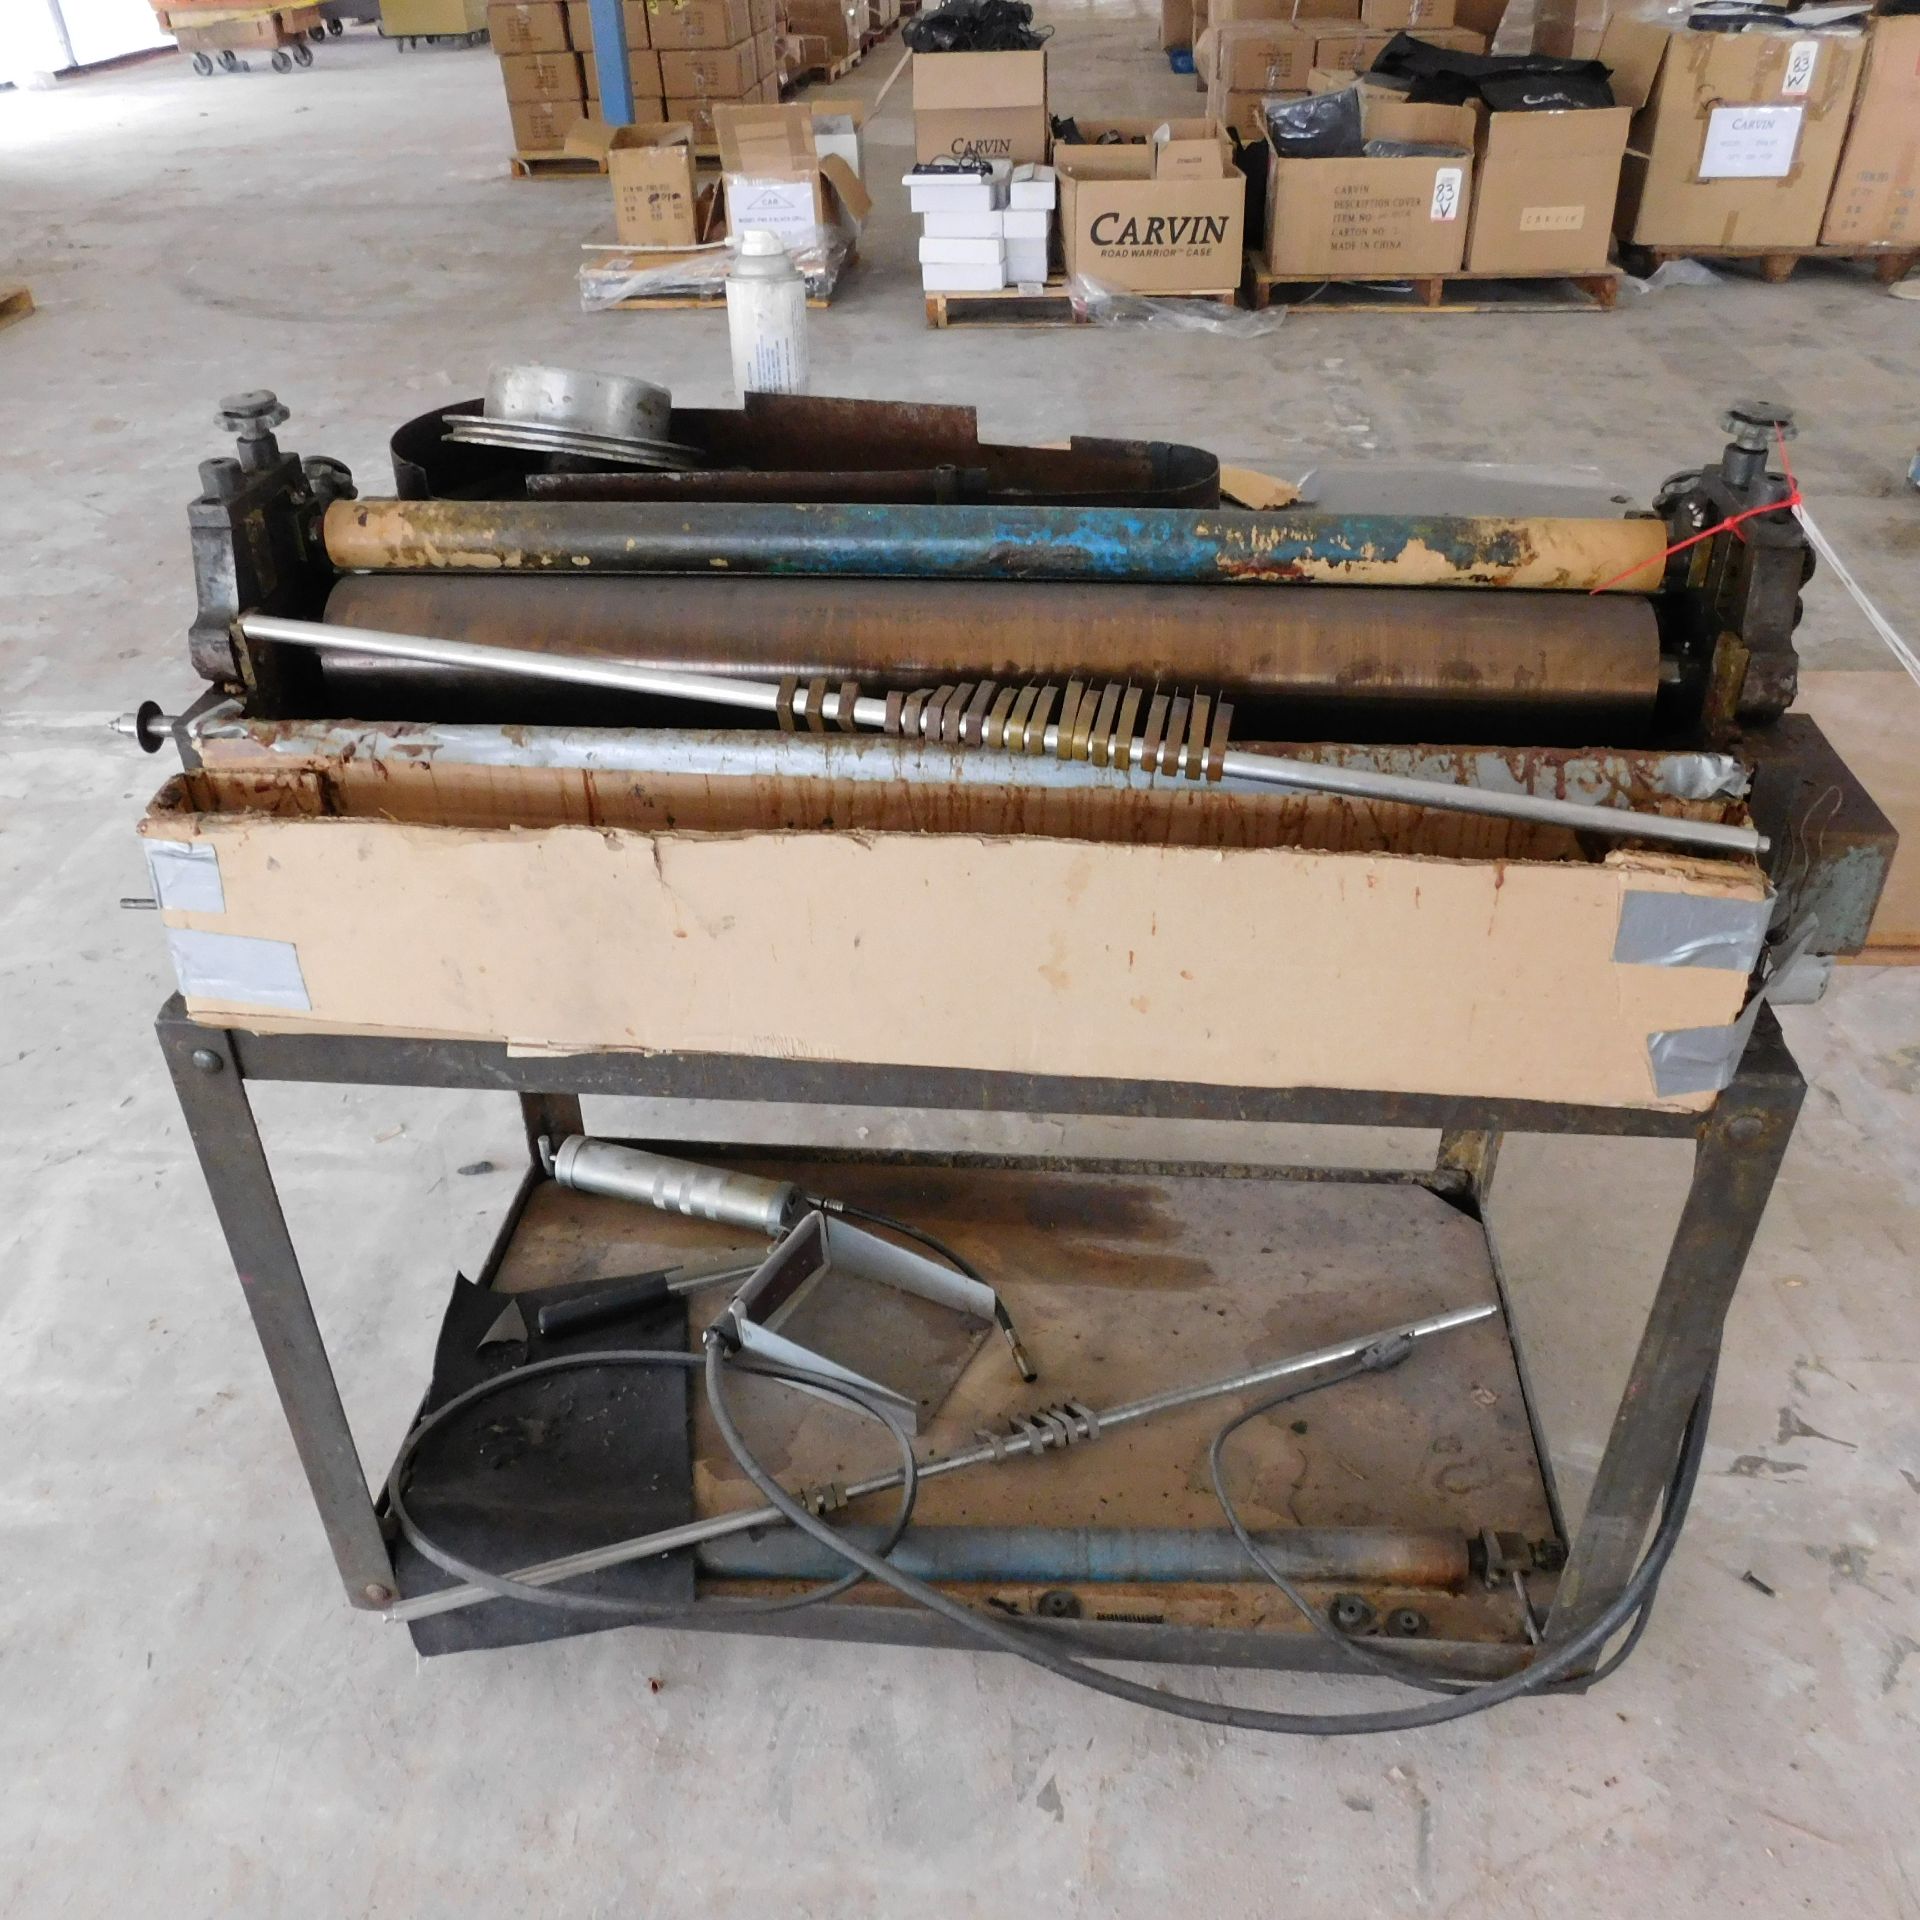 36" GLUE APPLICATION MACHINE, NEEDS WORK OR FOR PARTS